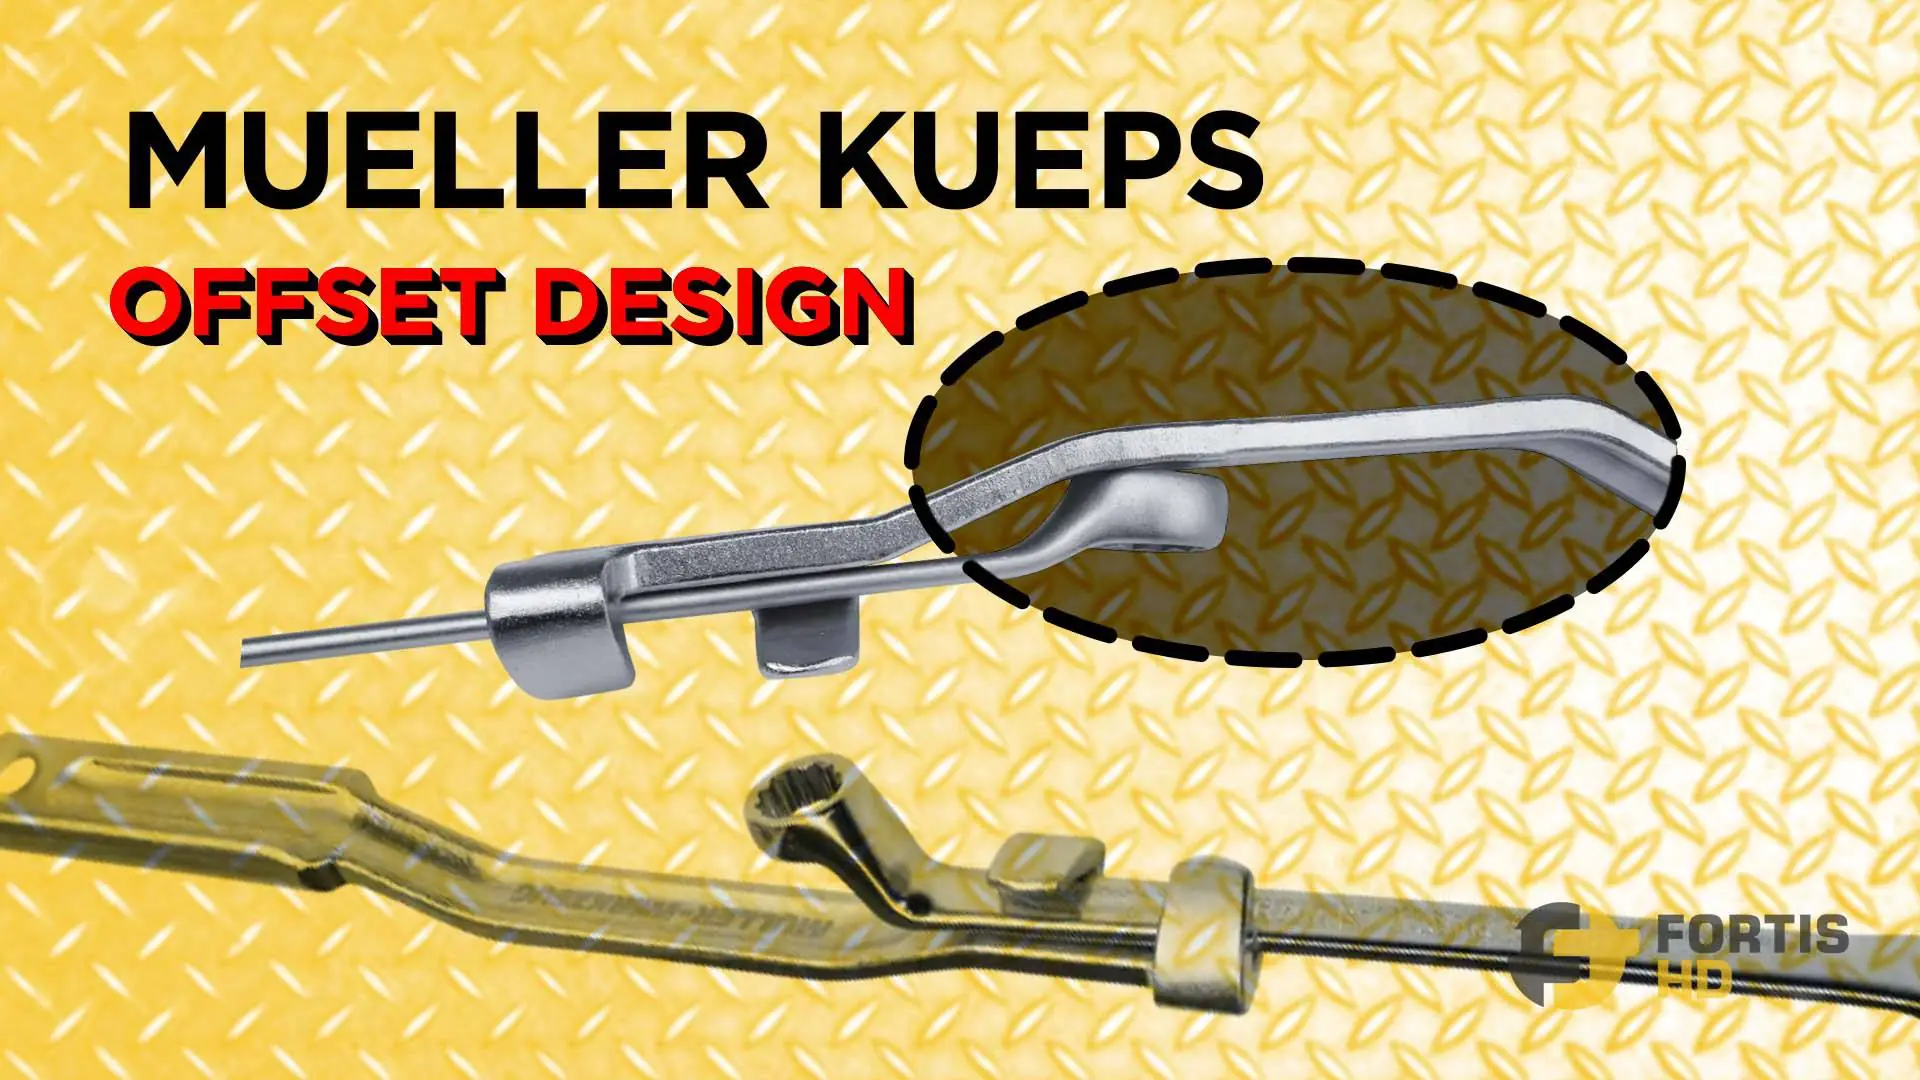 Close-up of the Mueller Kueps wrench extender offset design.